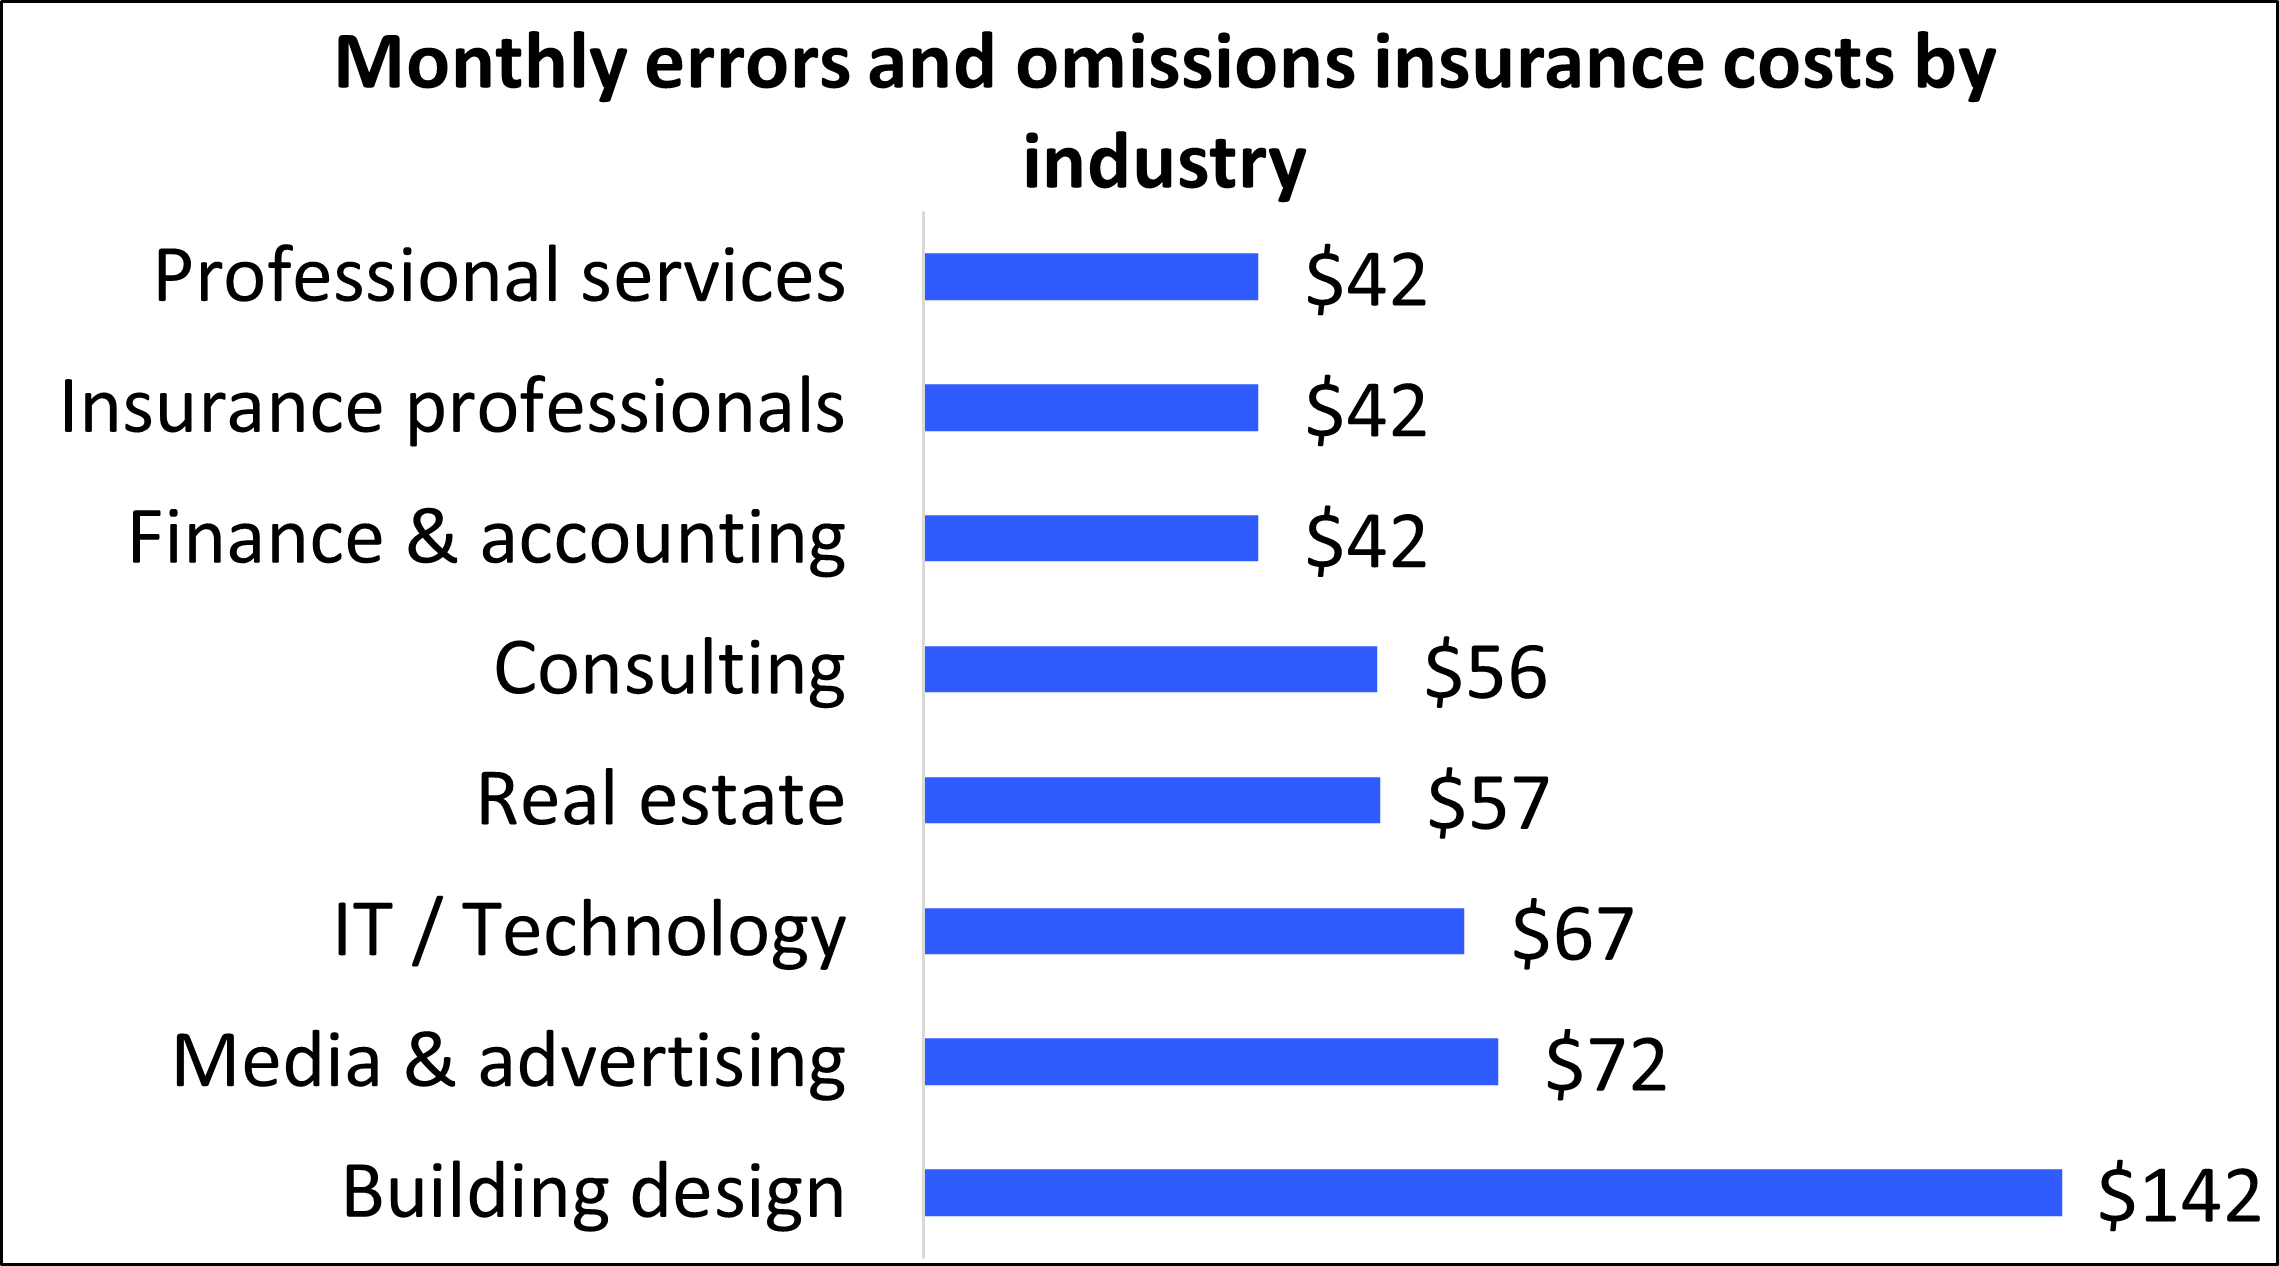 Average errors and omissions insurance premiums for Insureon customers by industry.